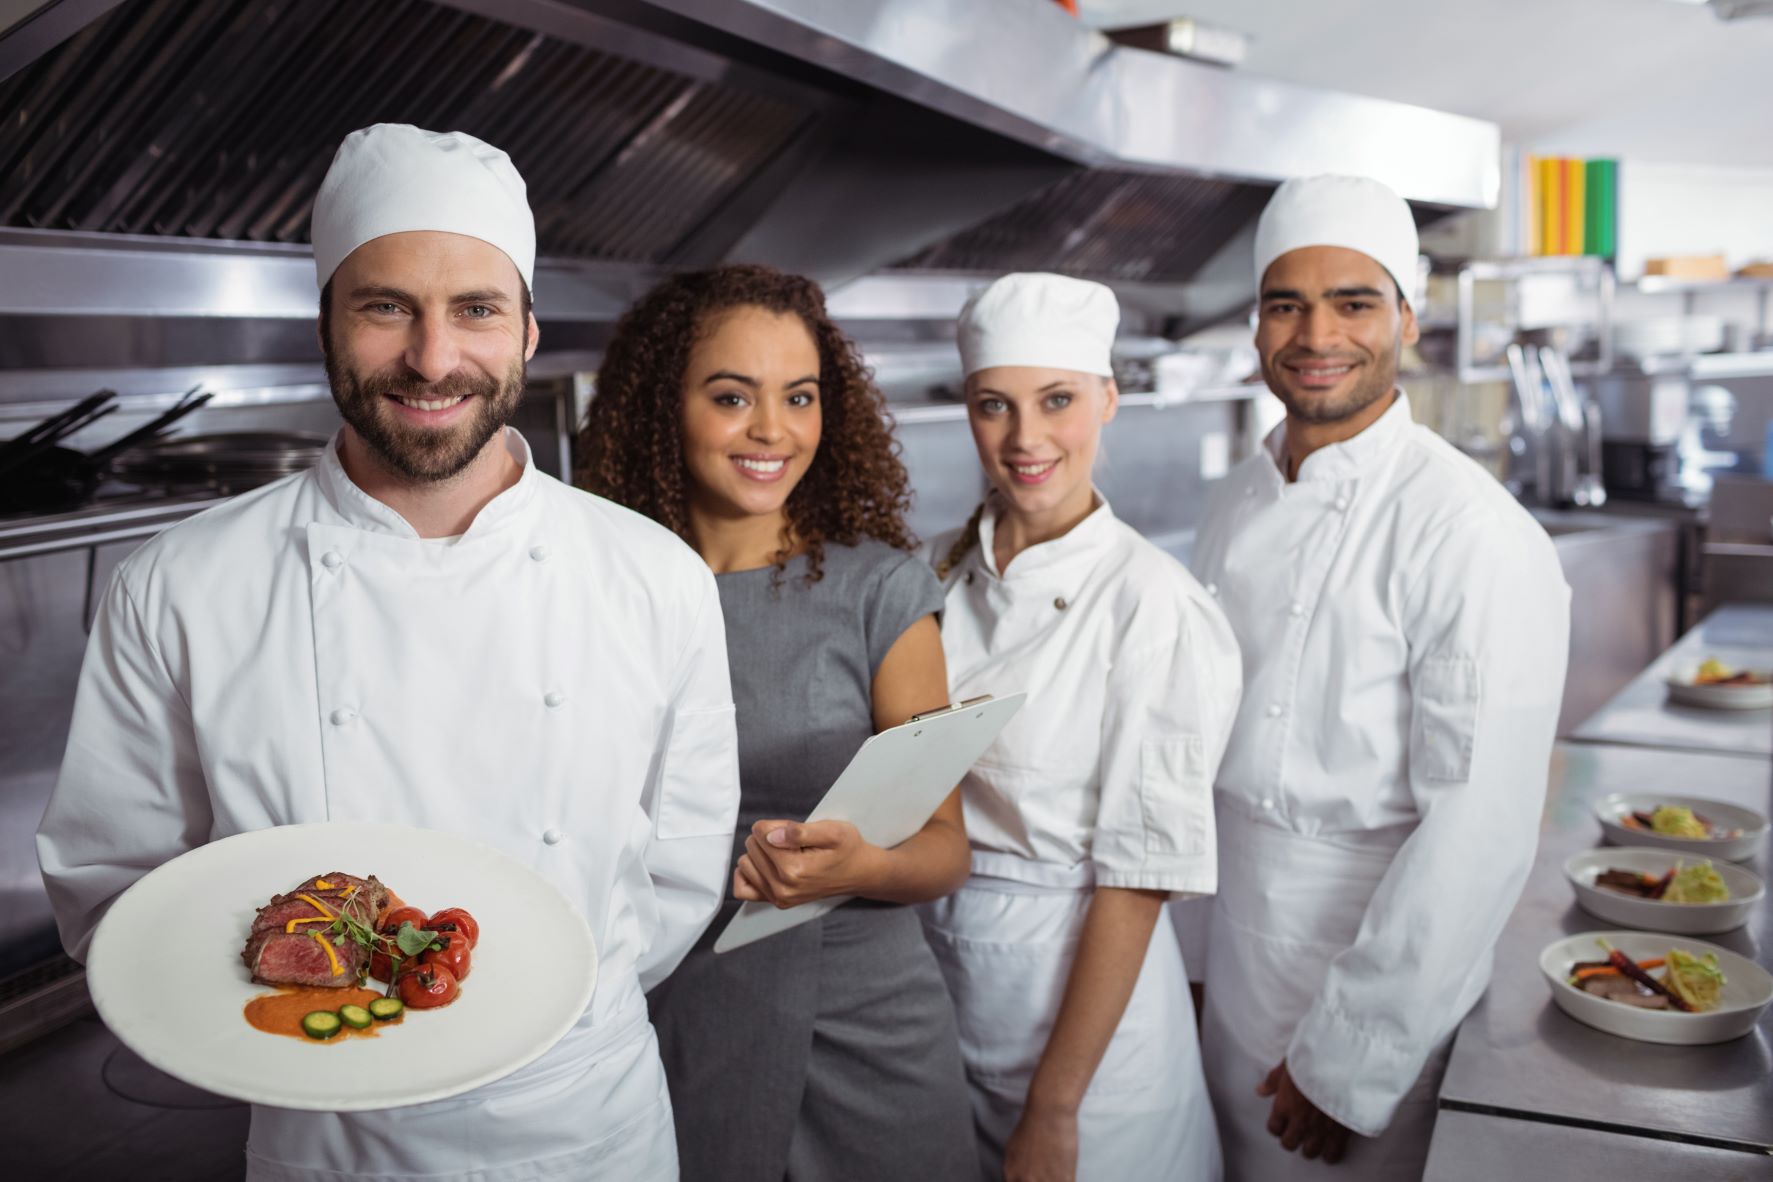 Become a Successful Restaurant Manager With These 8 Habits